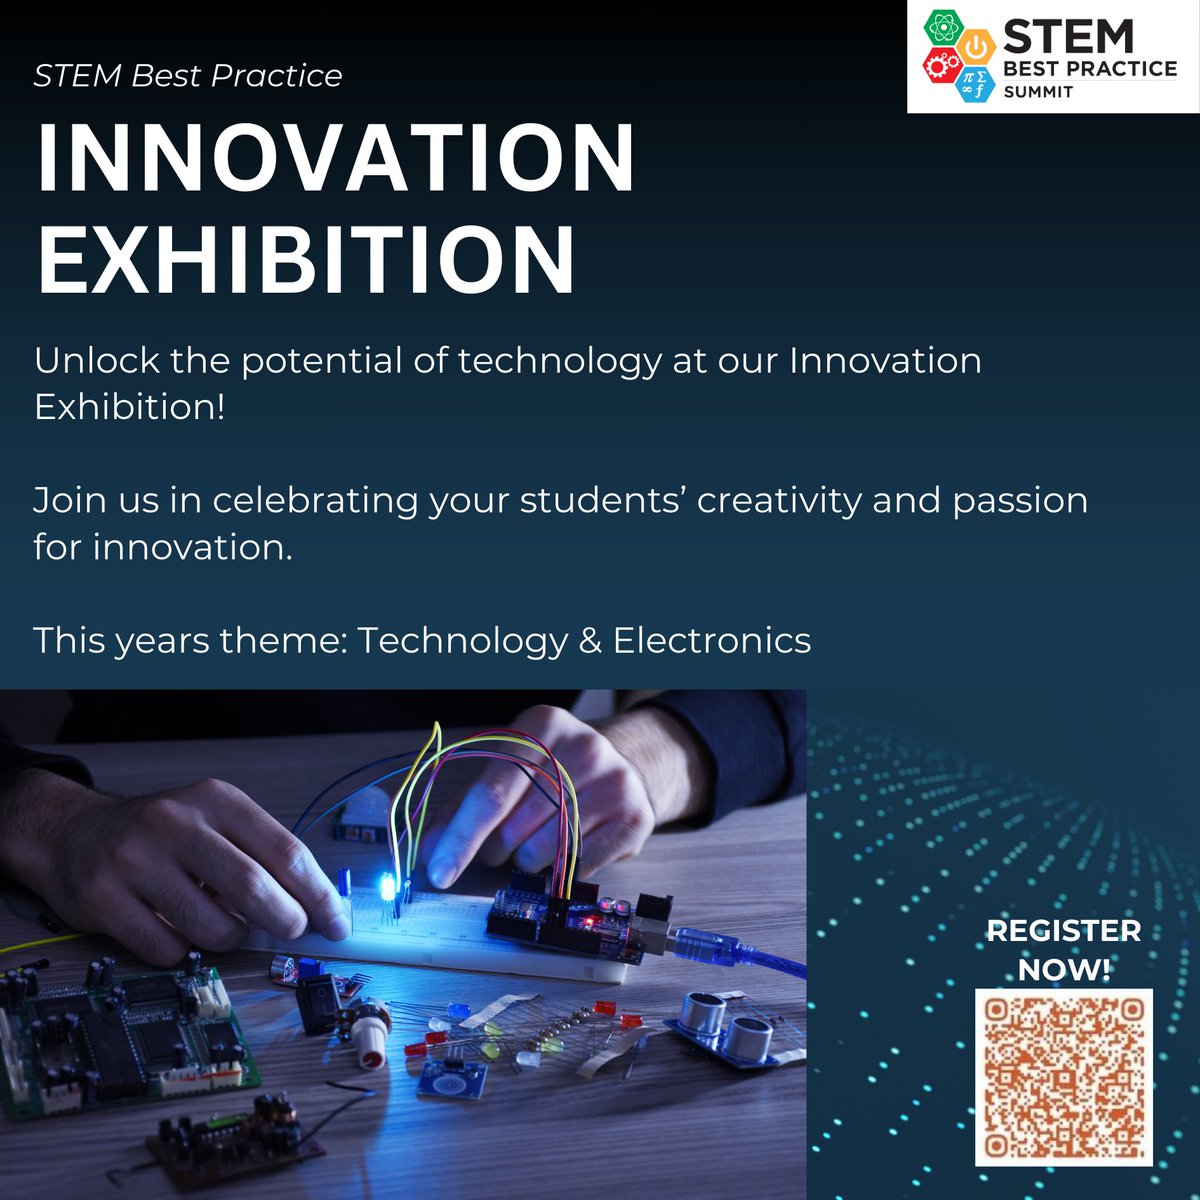 From circuitry to coding, support your students as they showcase their projects in Technology & Electronics 🤖

Register now: docs.google.com/forms/d/e/1FAI…

#STEM #STEMeducation #innovation #technology #STEMcareers #STEMawards #STEMworkshops #InnovationExhibition #STEMExhibition